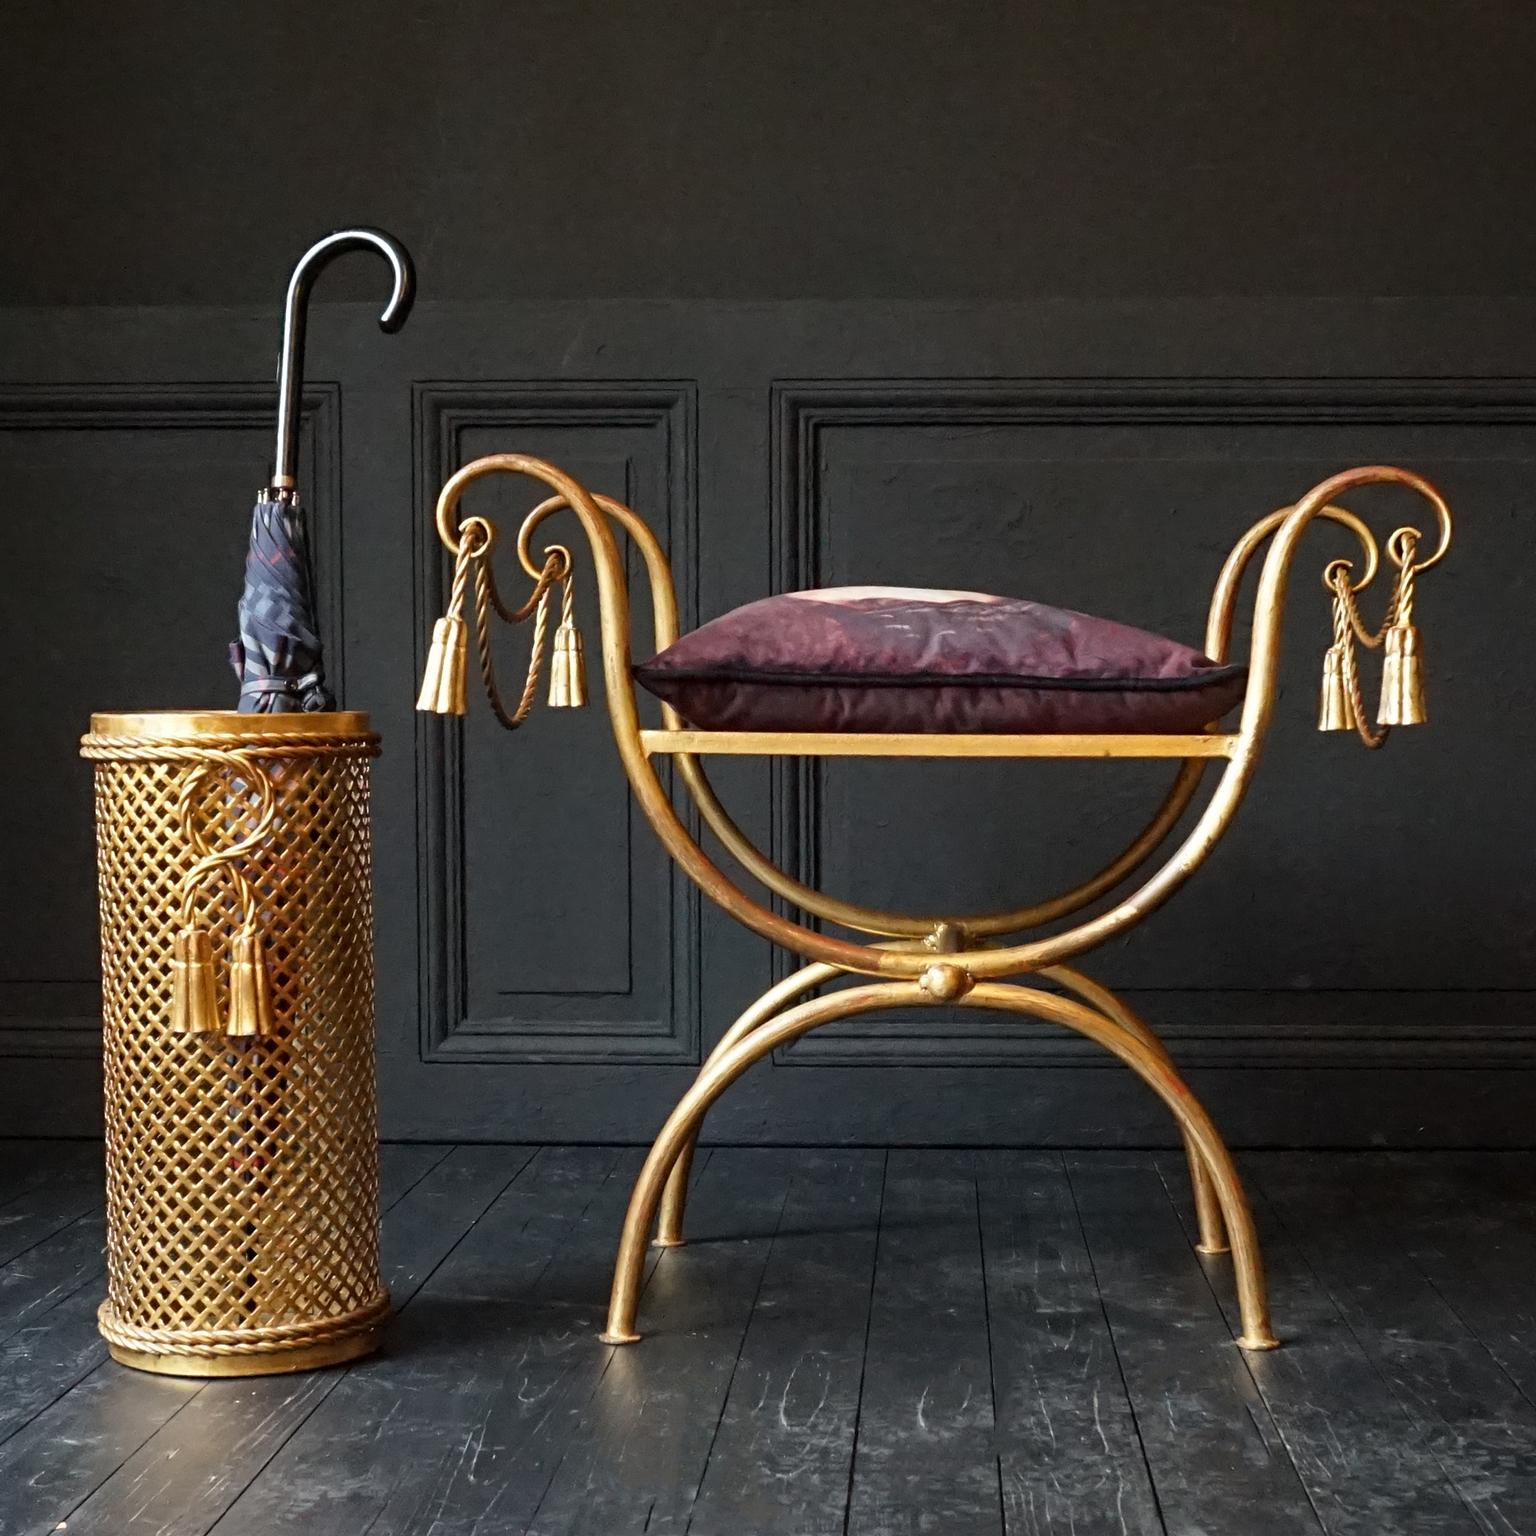 20th Century 1950s Italian Midcentury Gilt Metal Rope and Tassel Stool and Umbrella Stand For Sale